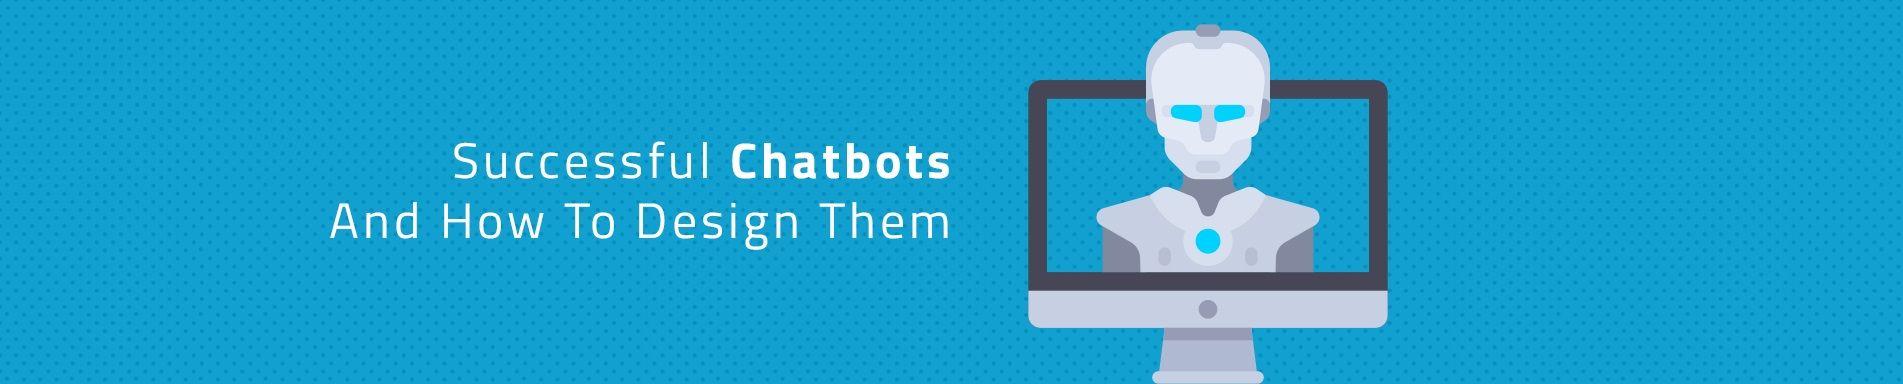 Successful Chatbots and How to Design Them